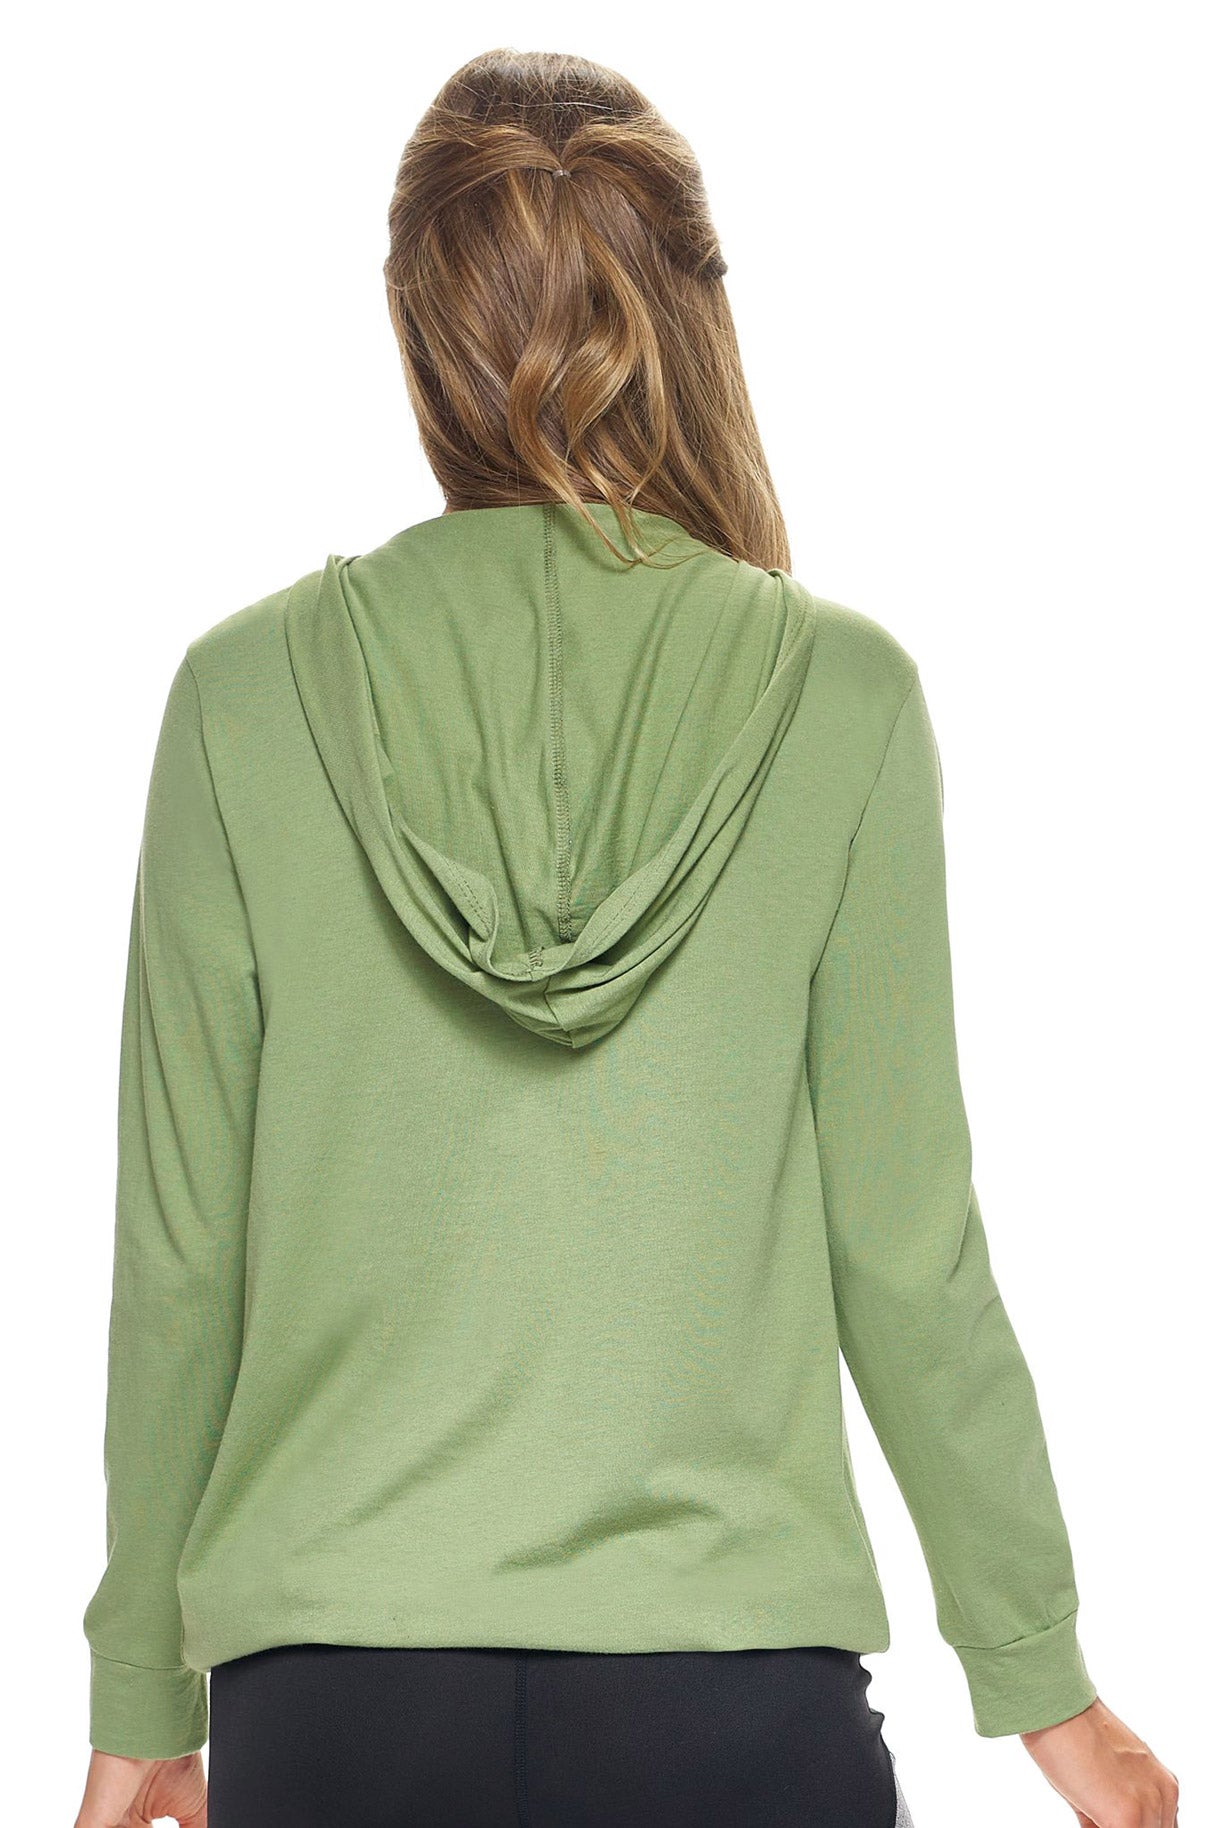 Expert Brand Wholesale Women's Hoodie Shirt V-Neck Lenzing Modal Made in USA in Meadow Green Image 2#meadow